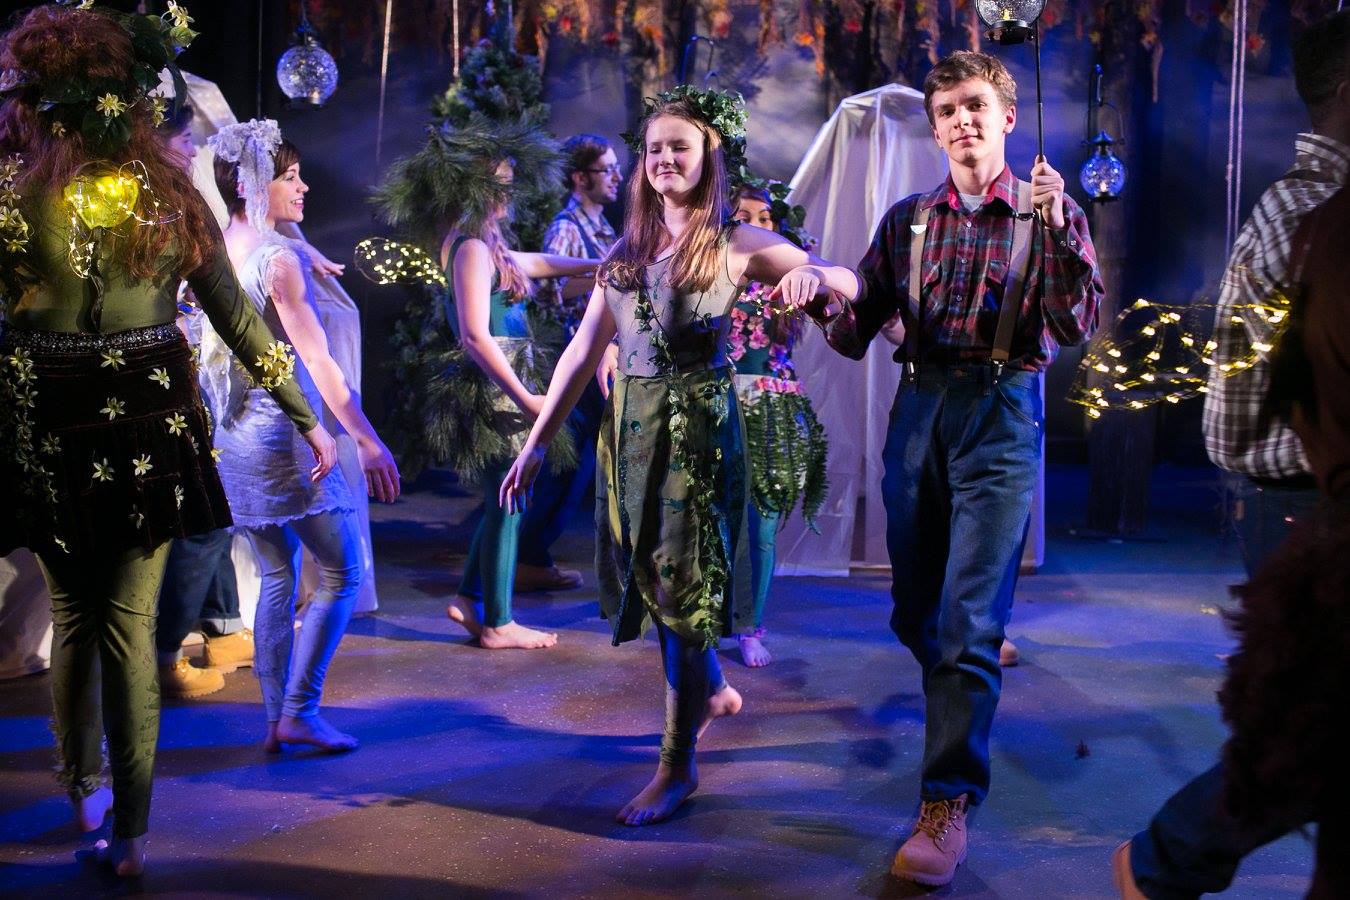 Fairies with light up glowing wings and Sprites as lumberjacks dancing in Shakespeare's A Midsummer Night's Dream costume design by Katharine Tarkulich